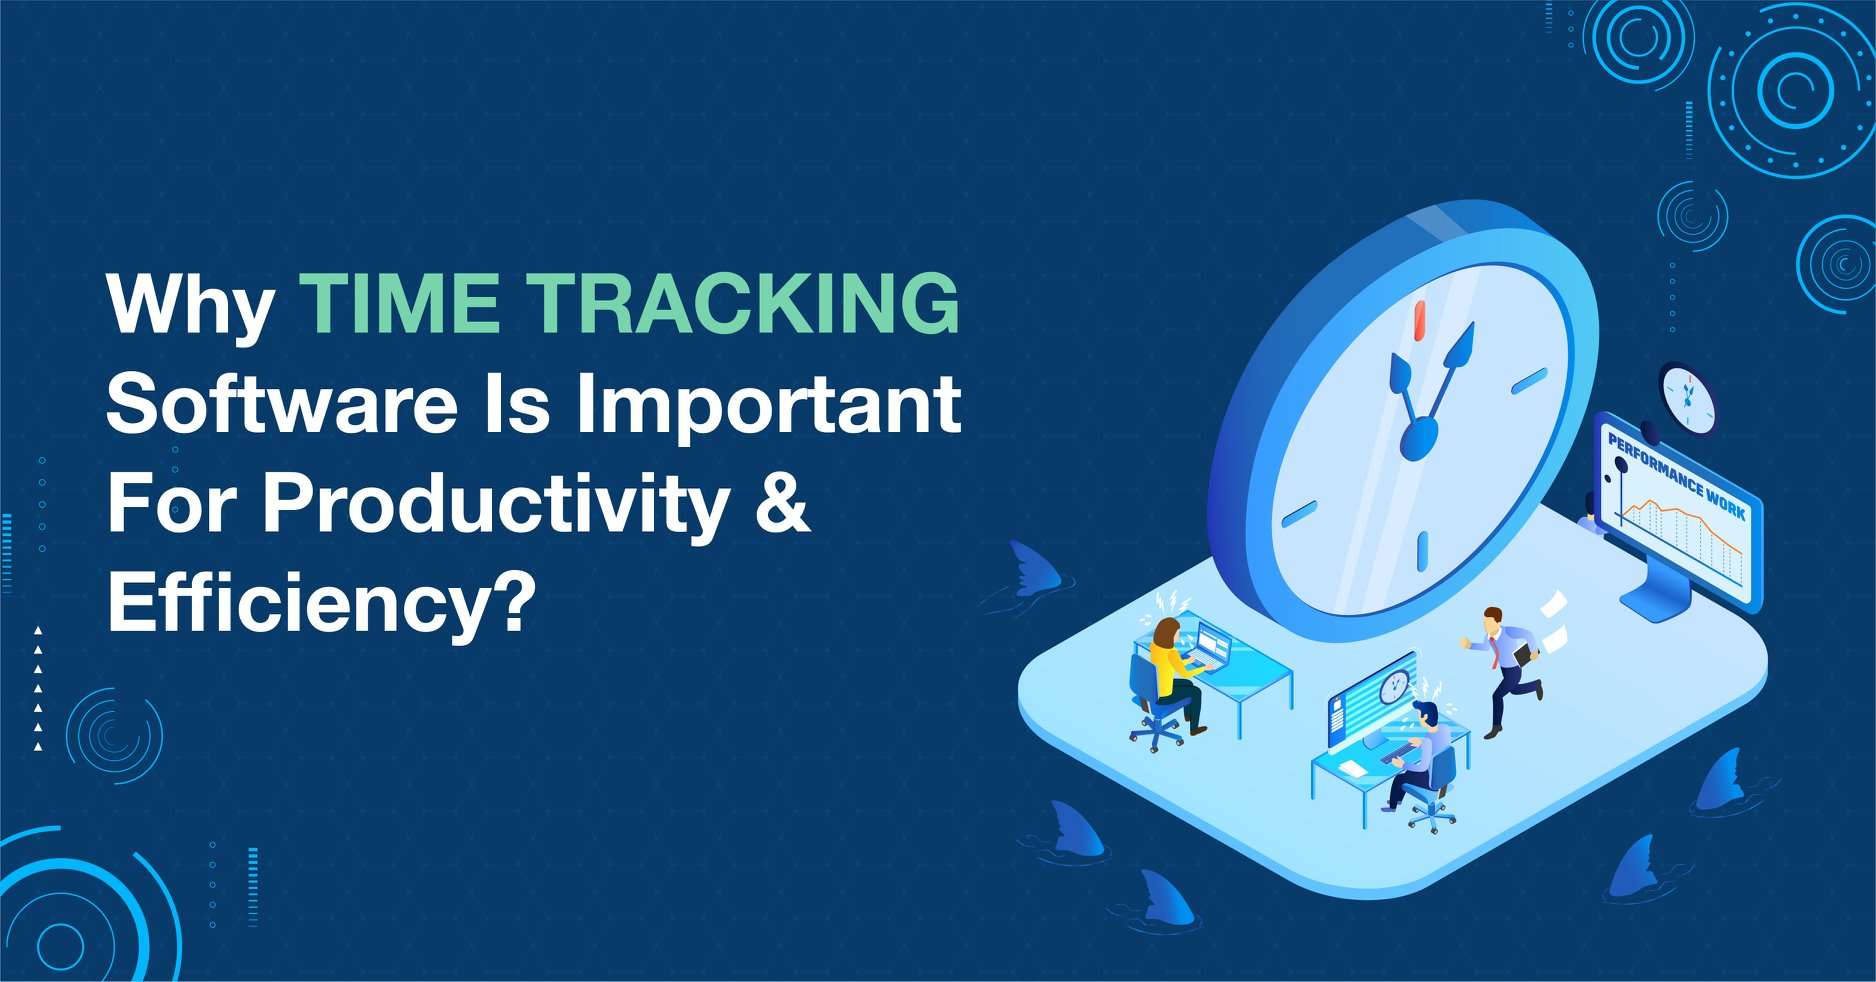 Why is a time tracking software essential in an organization, and how can it make your team efficient?